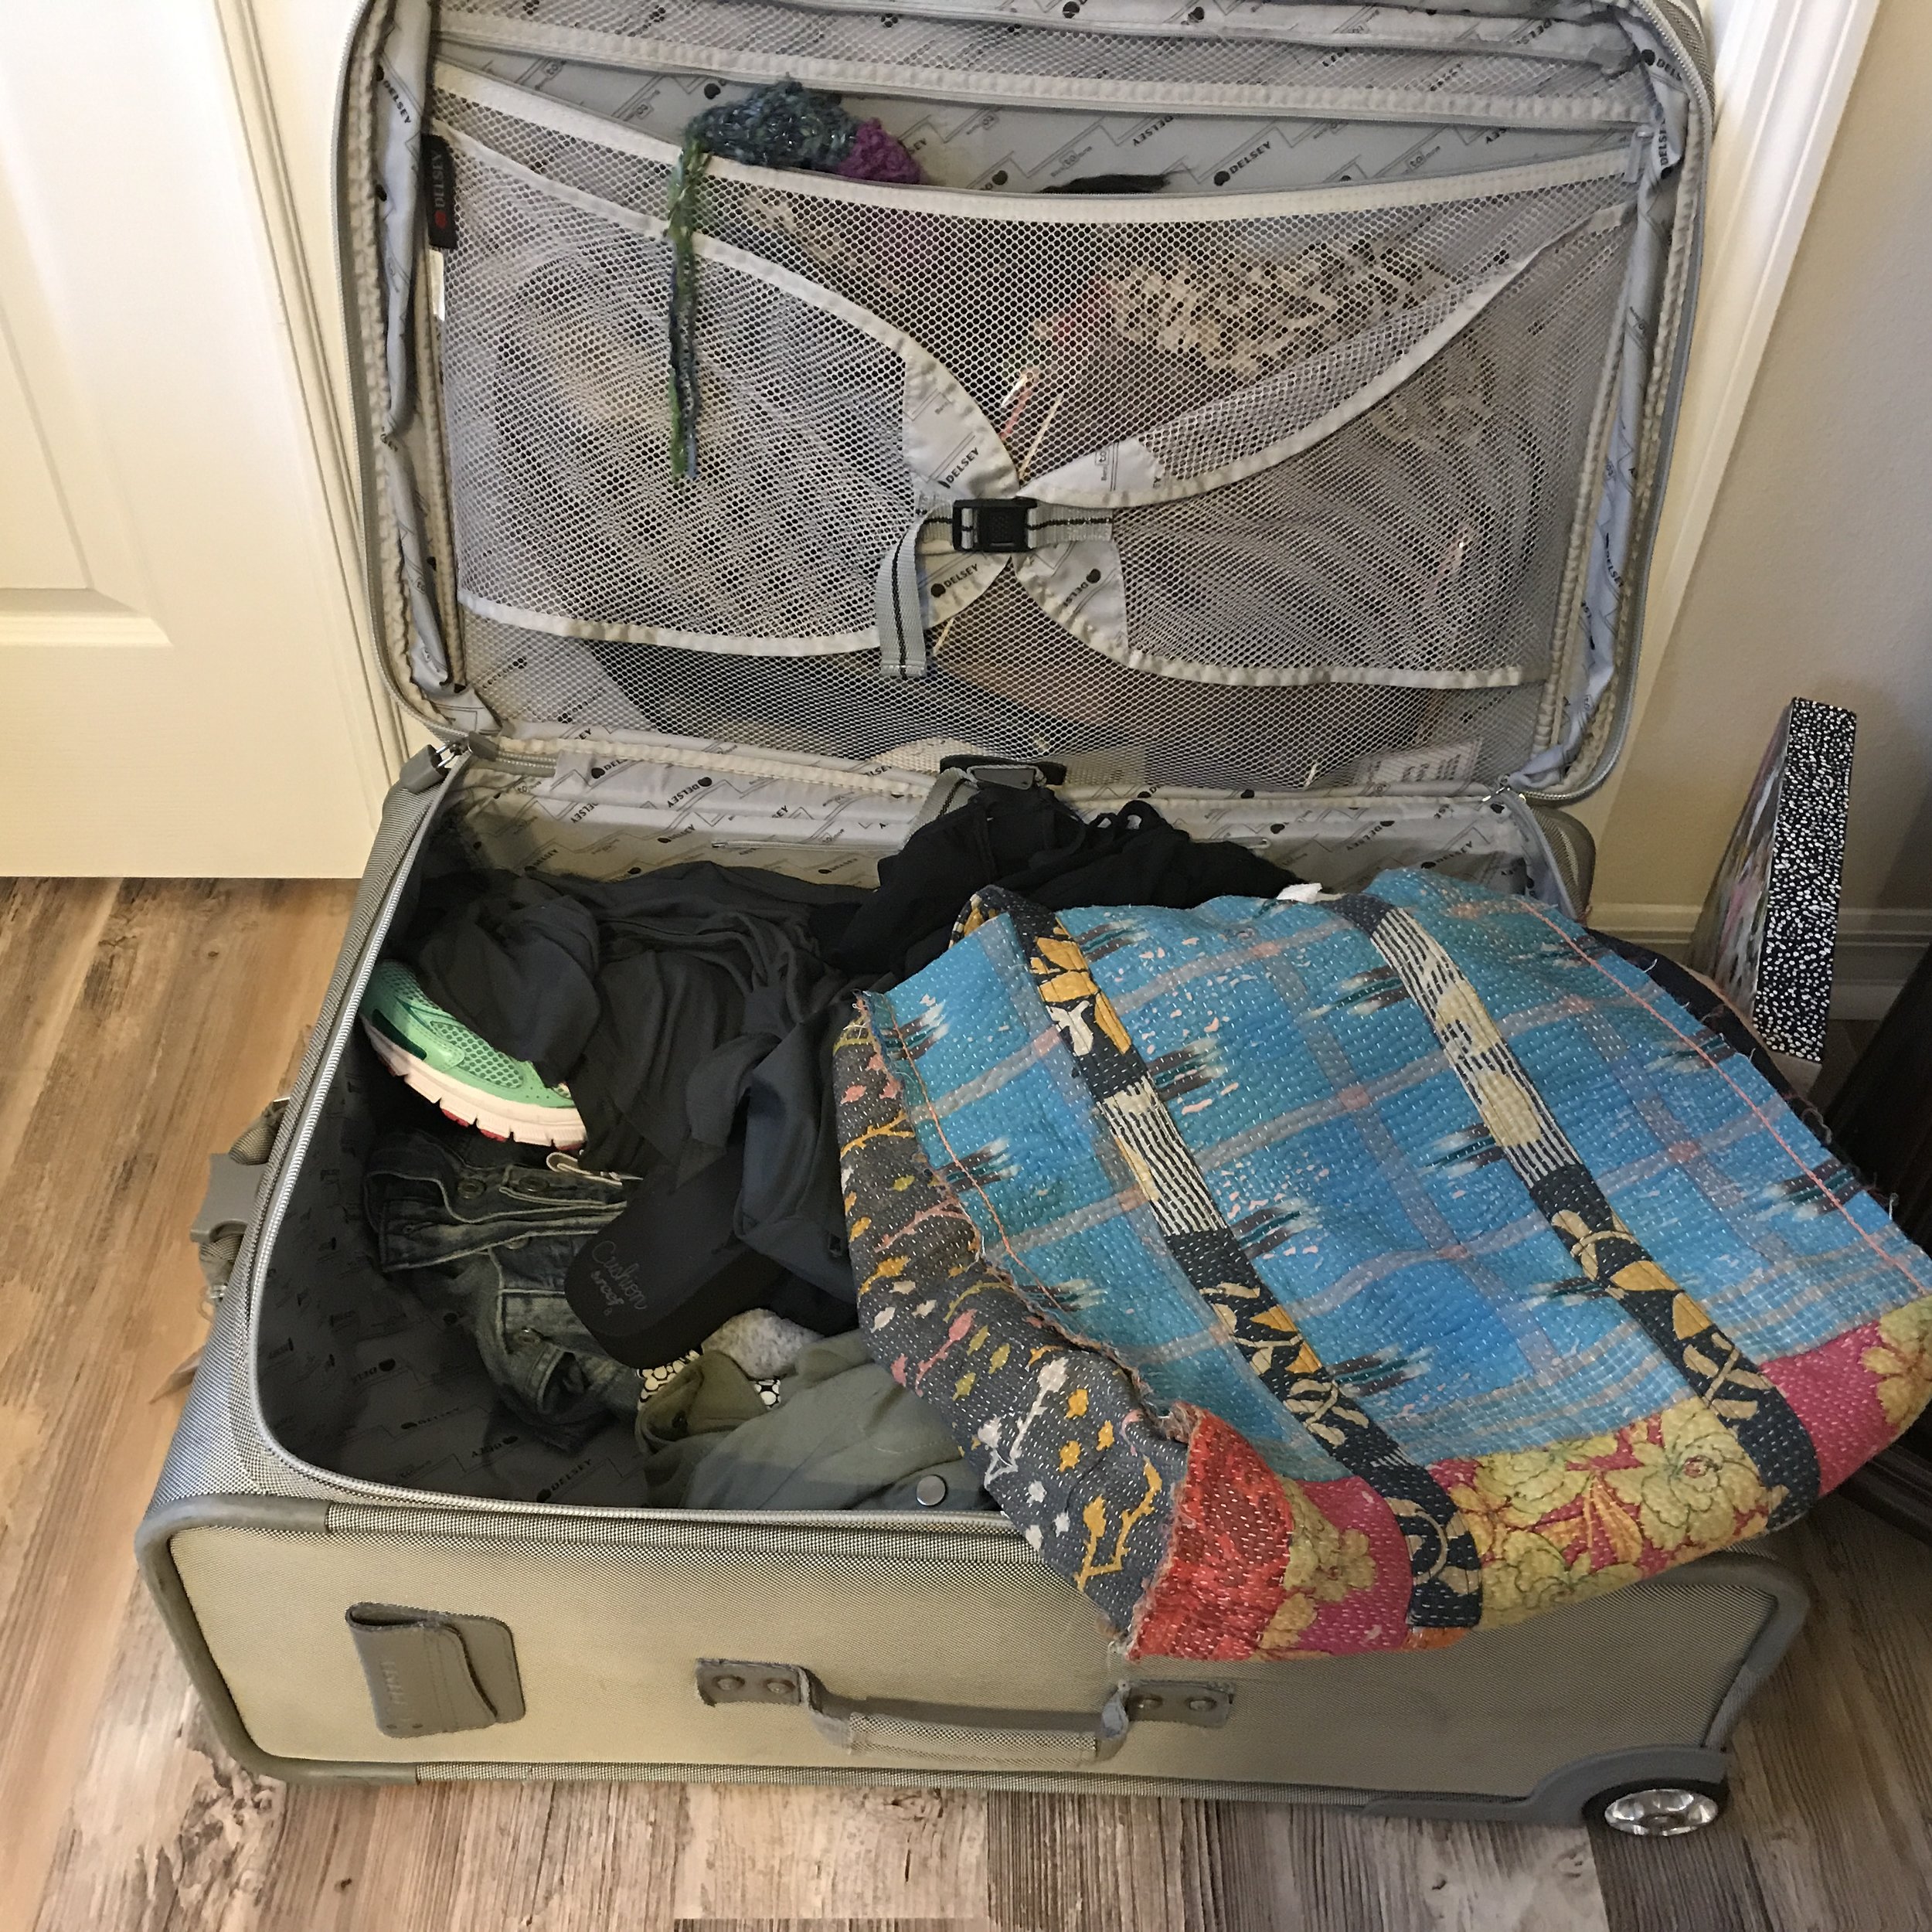 Unpacking a suitcase